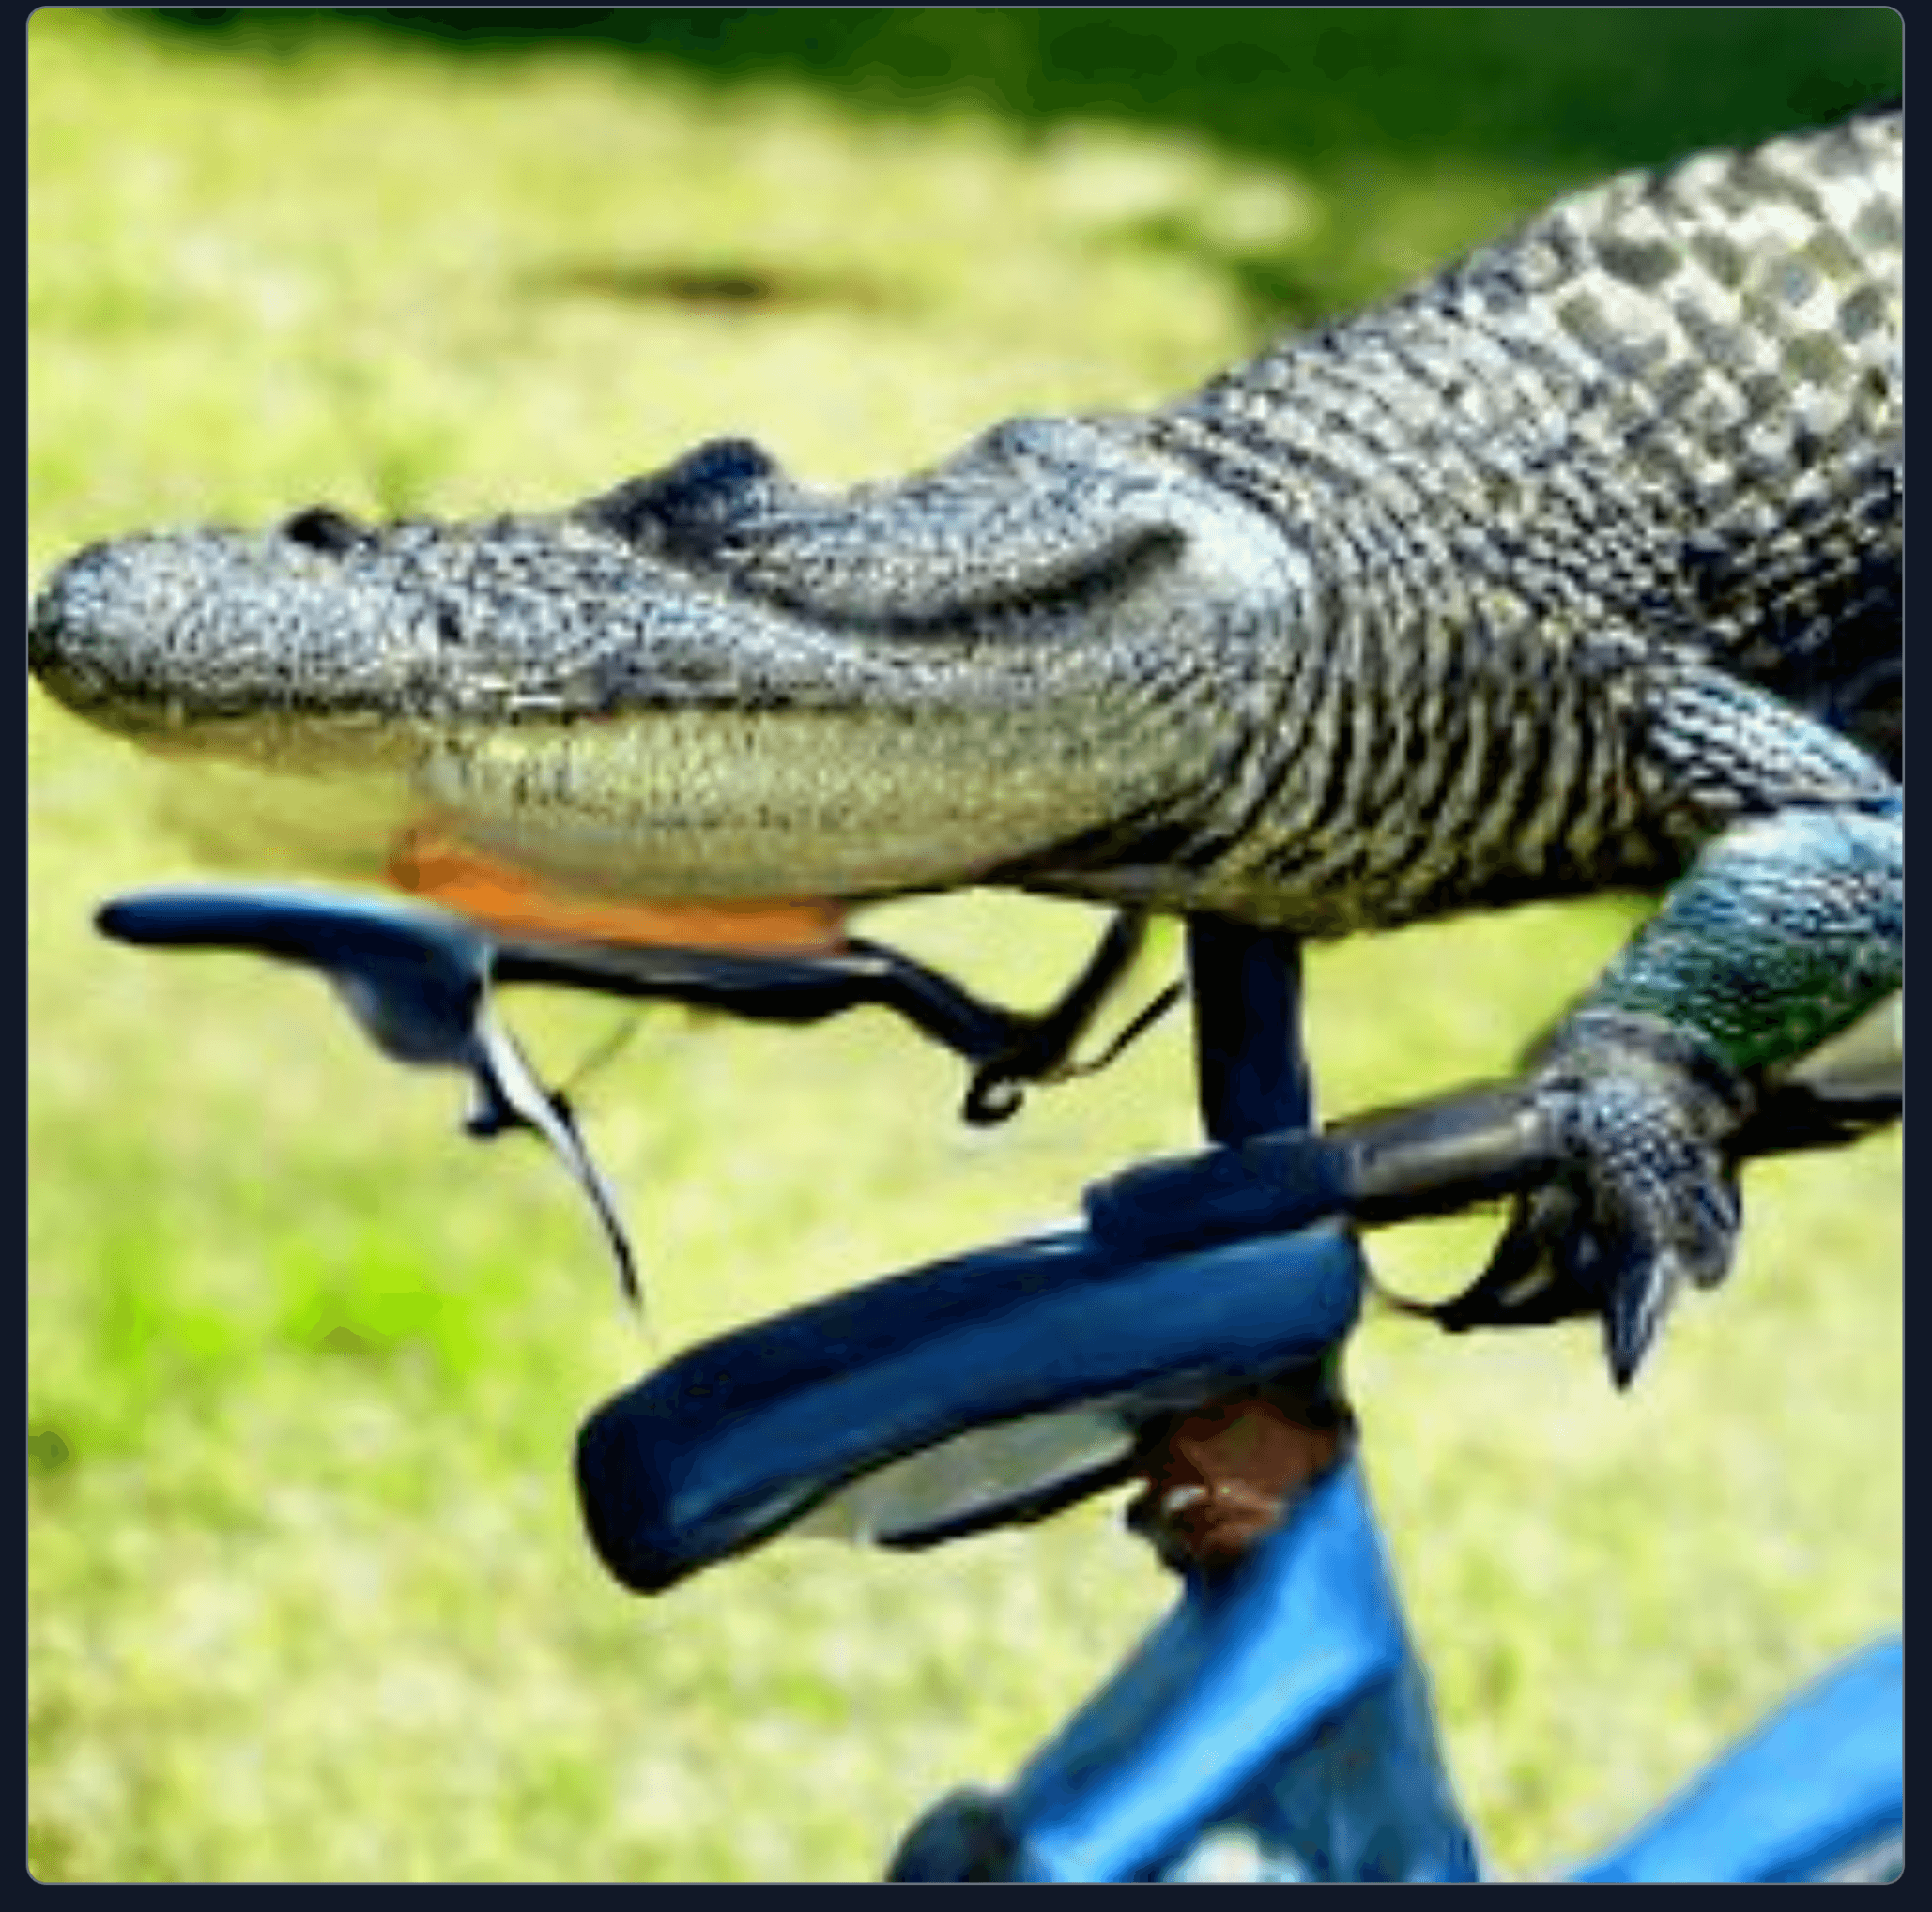 An alligator riding a bicycle